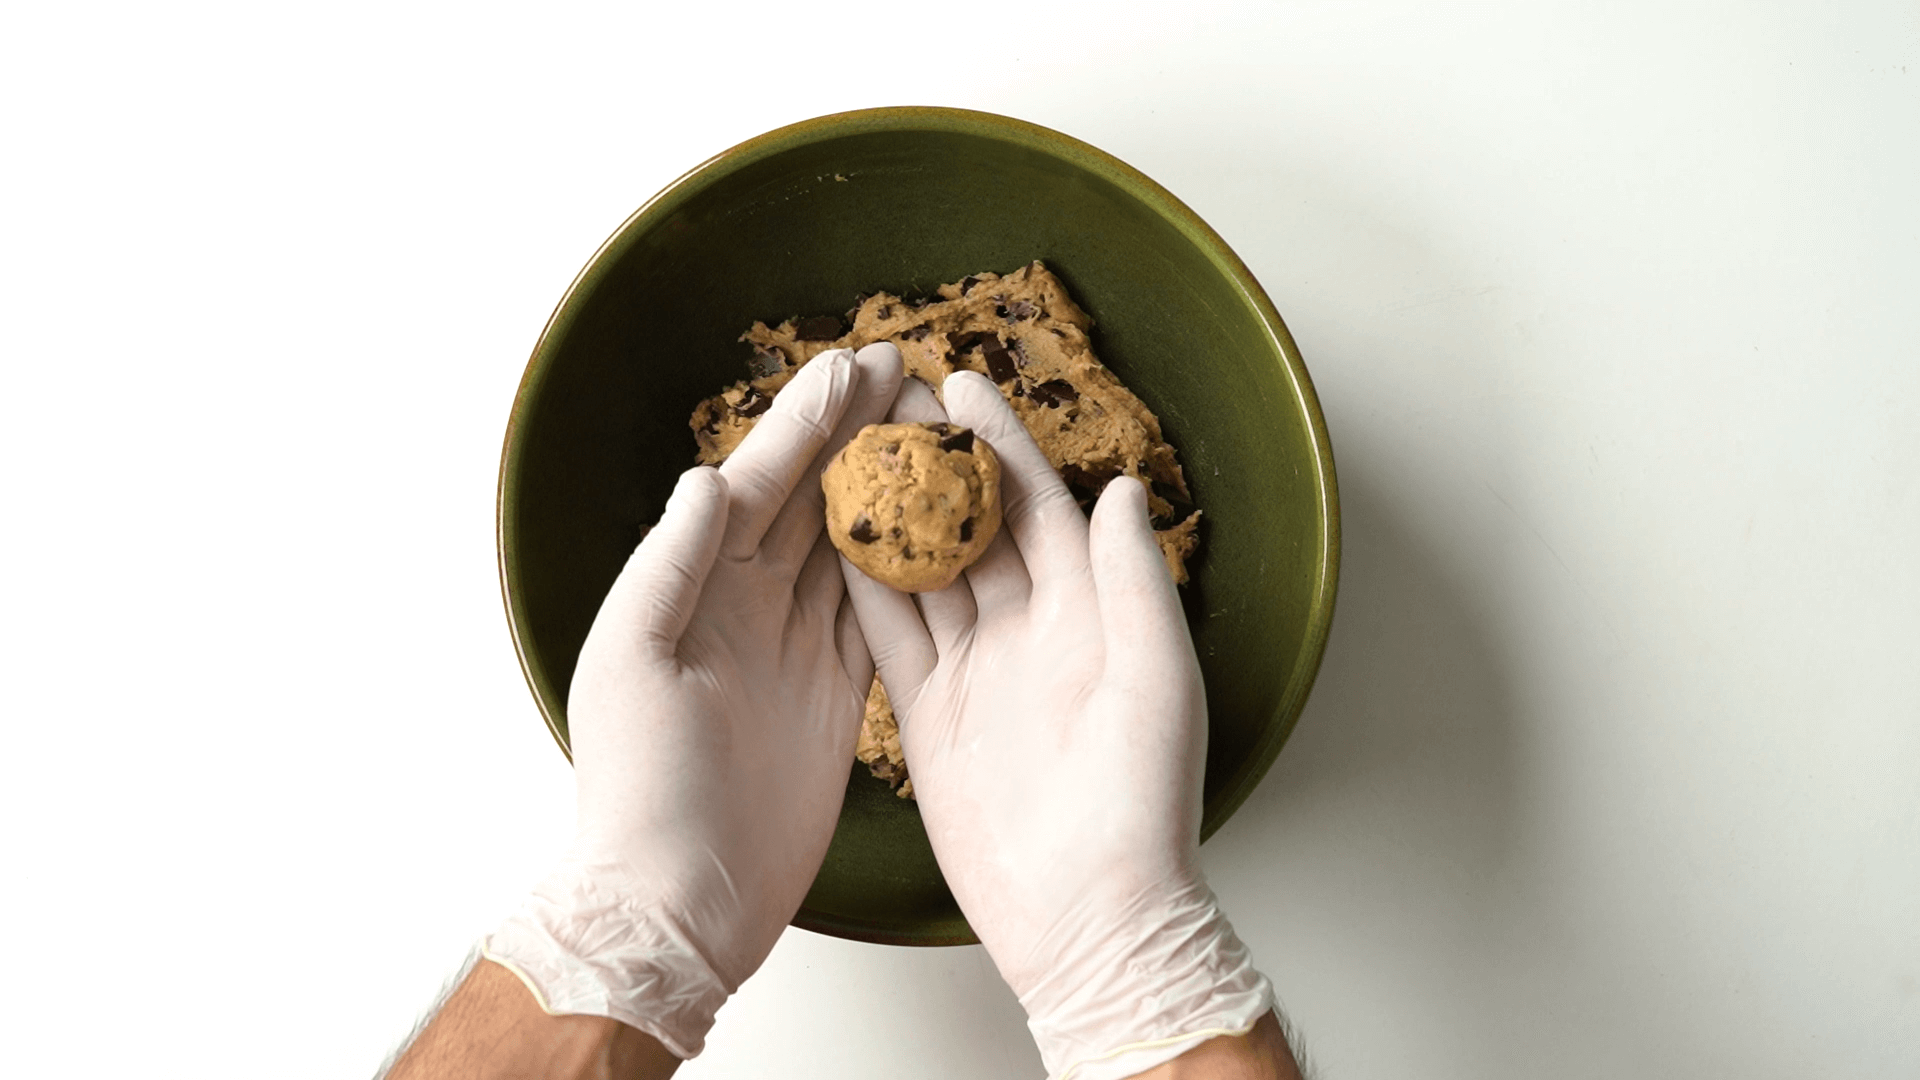 Making of choco chip cookies